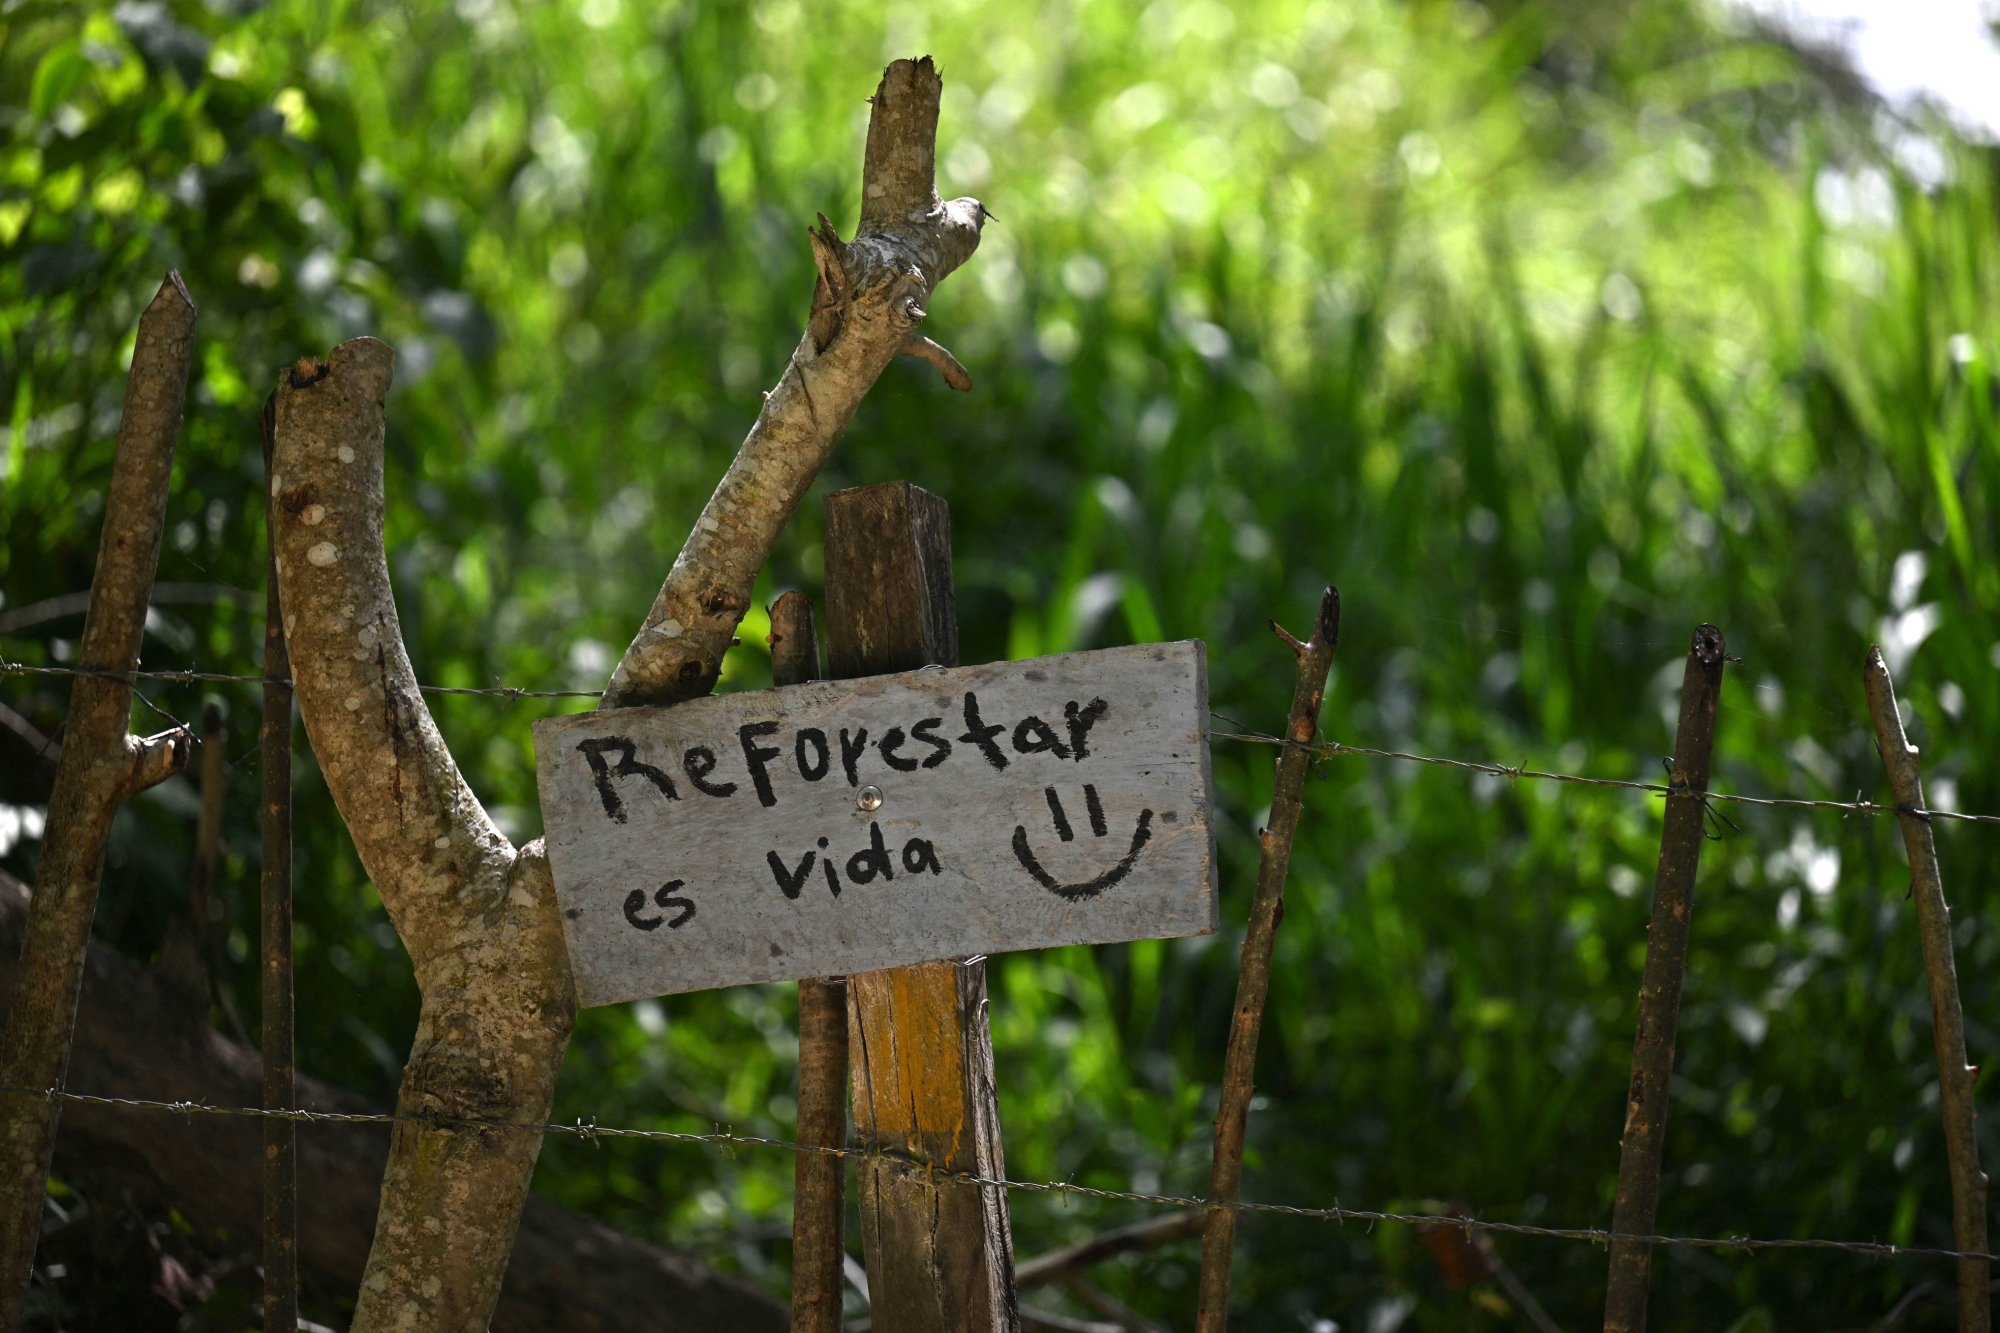 A sign reading "reforestar es vida" against a background of green trees.